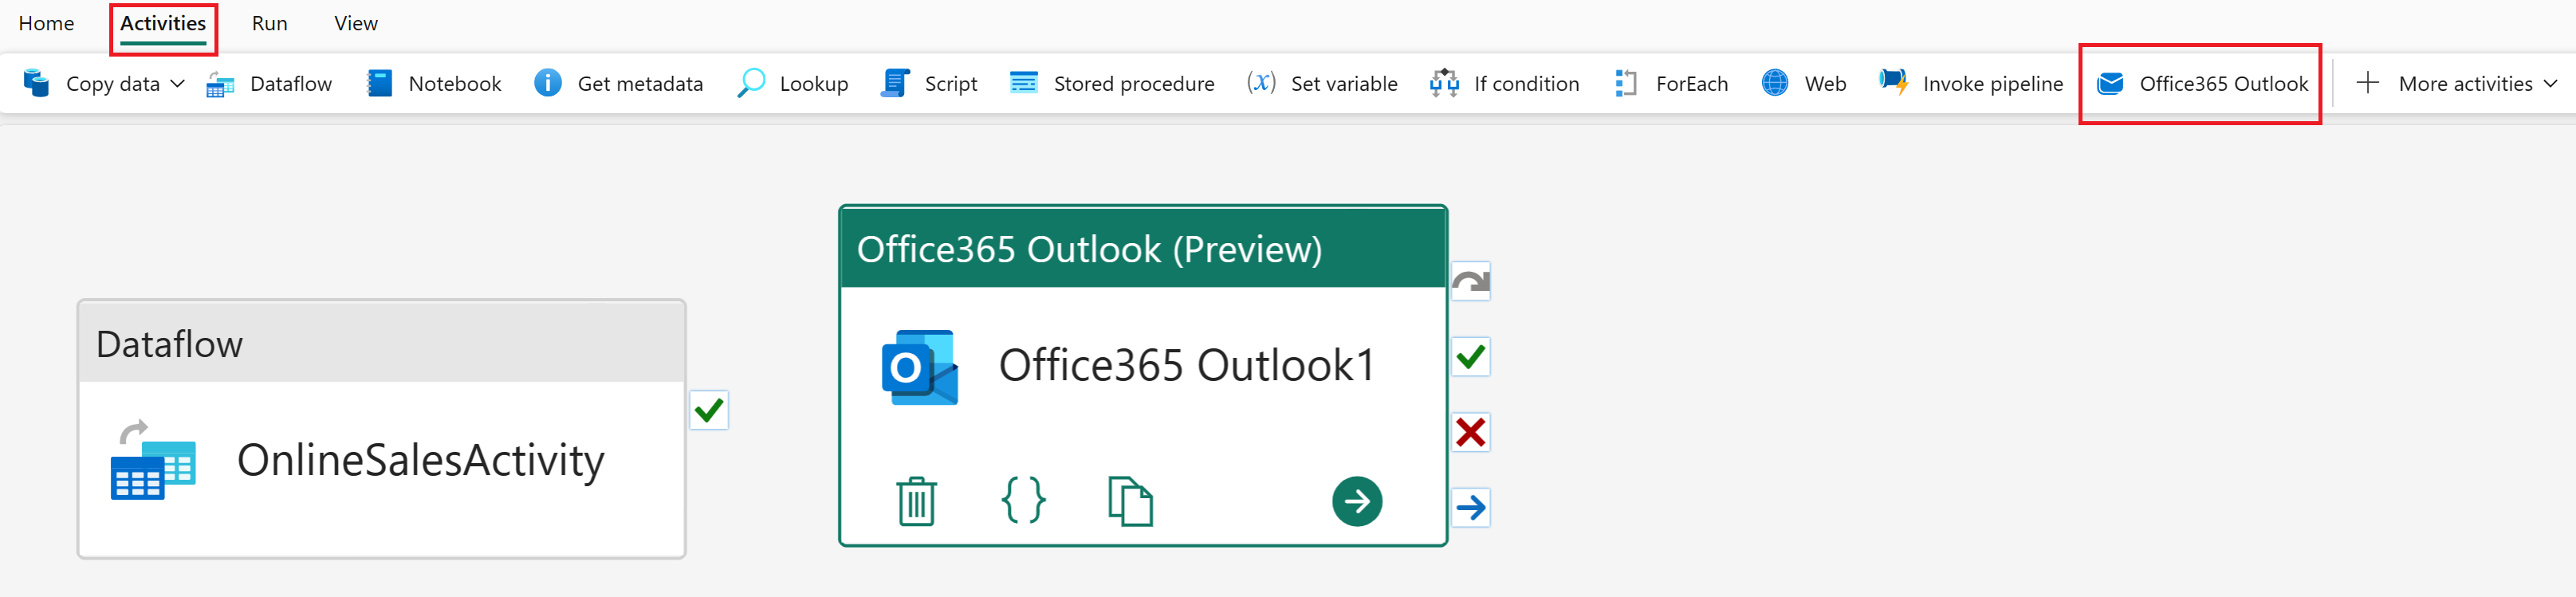 Screenshot of the Office365 Outlook activity information.